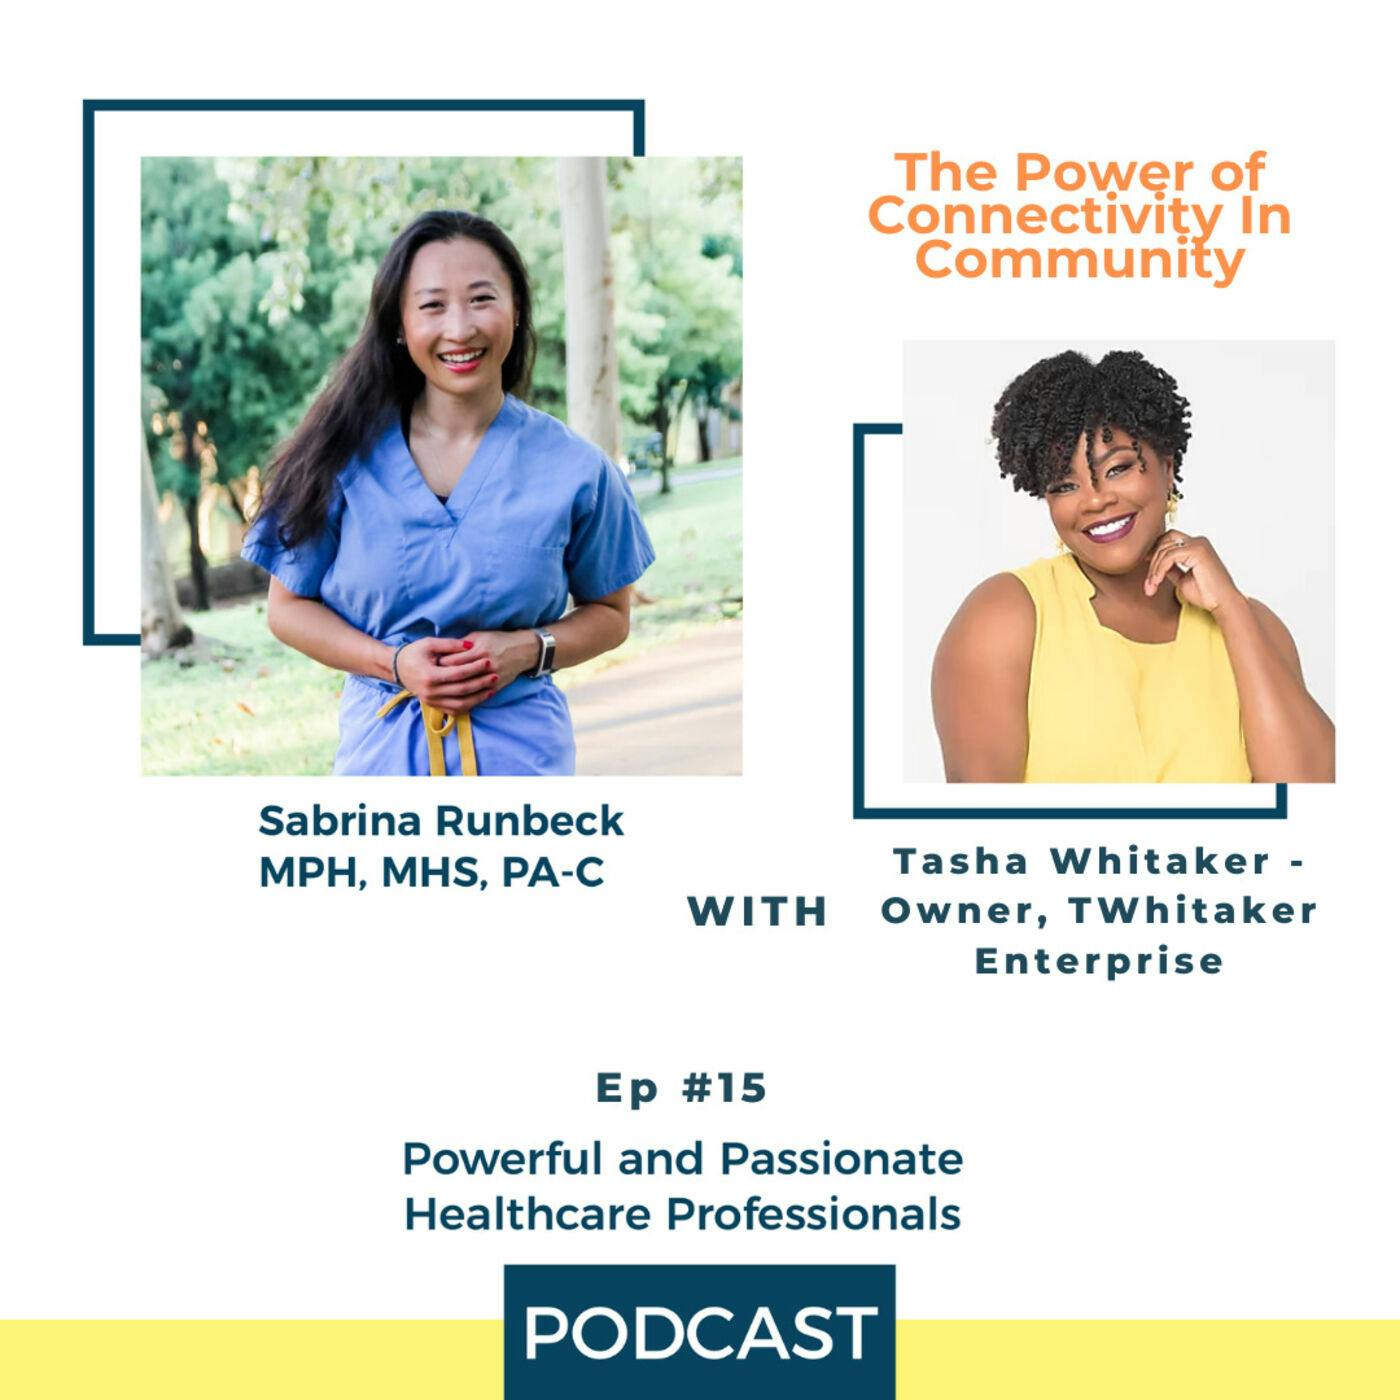 Ep 15 – The Power of Connectivity In Community with Tasha Whitaker